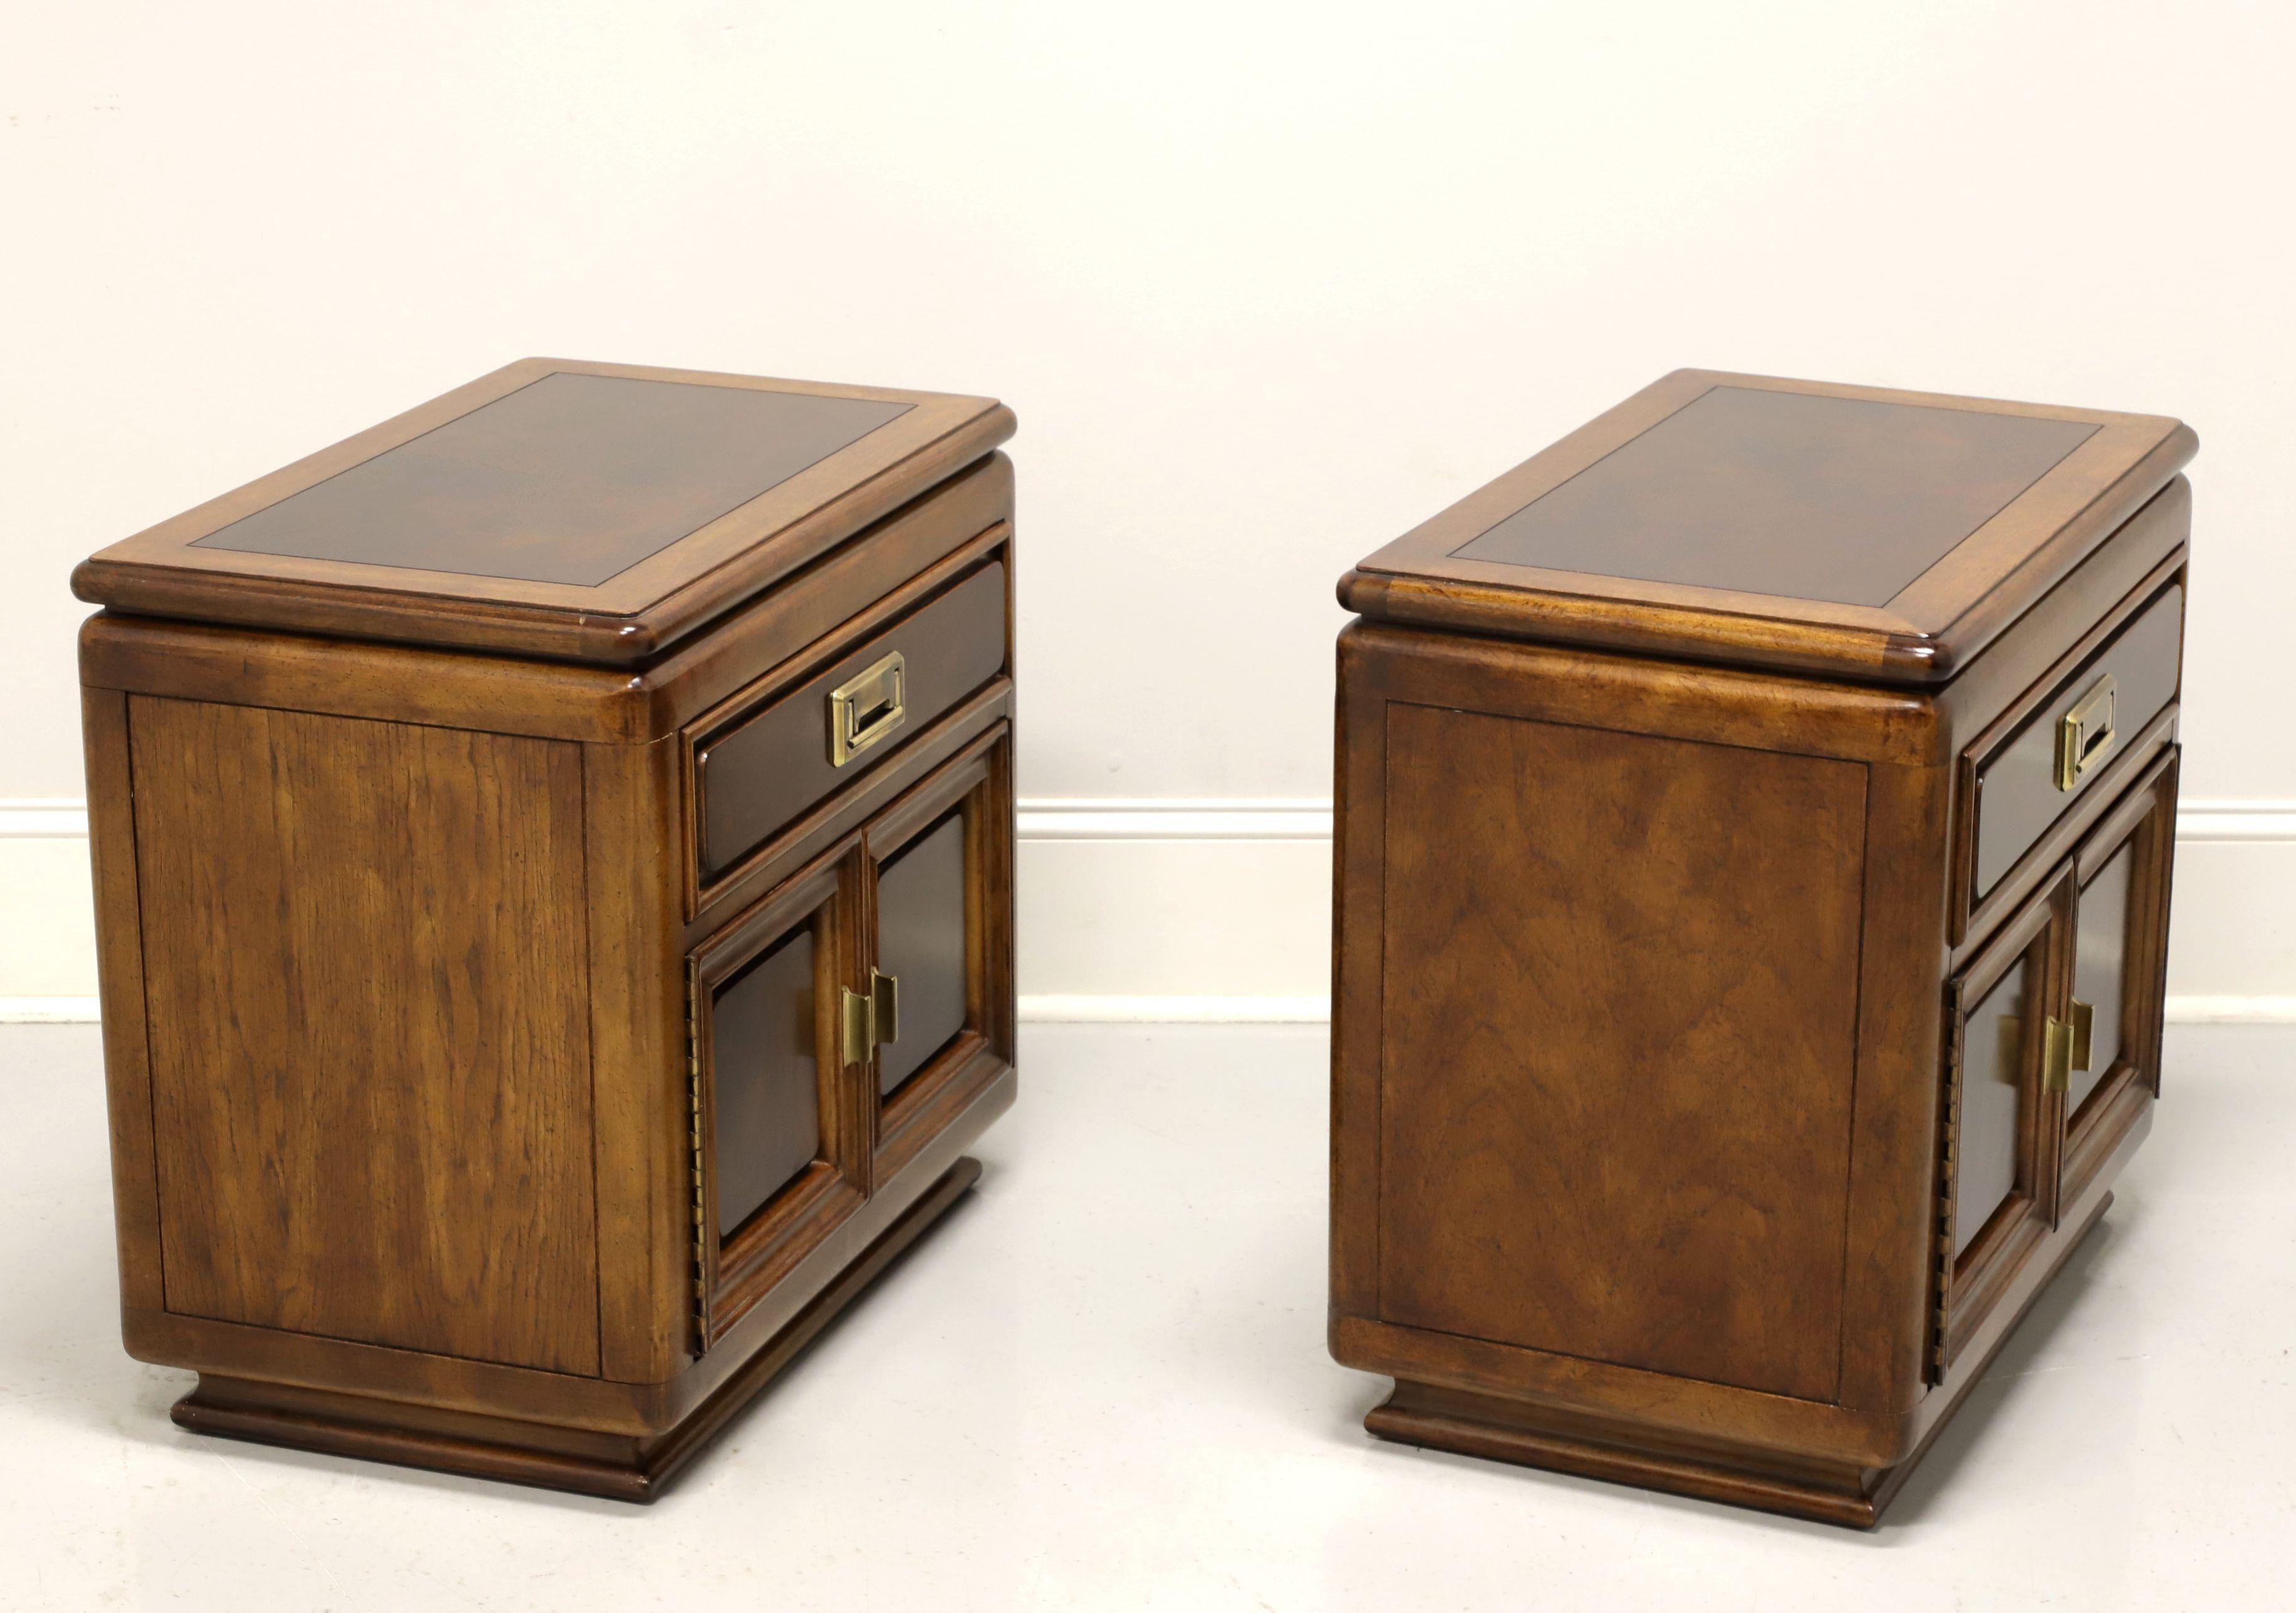 A pair of Asian style nightstands by Unique Furniture. Nutwood with slightly distressed finish, burlwood to top, drawer & door fronts, and brass hardware. Features one drawer of dovetail construction over a cabinet with dual doors revealing an